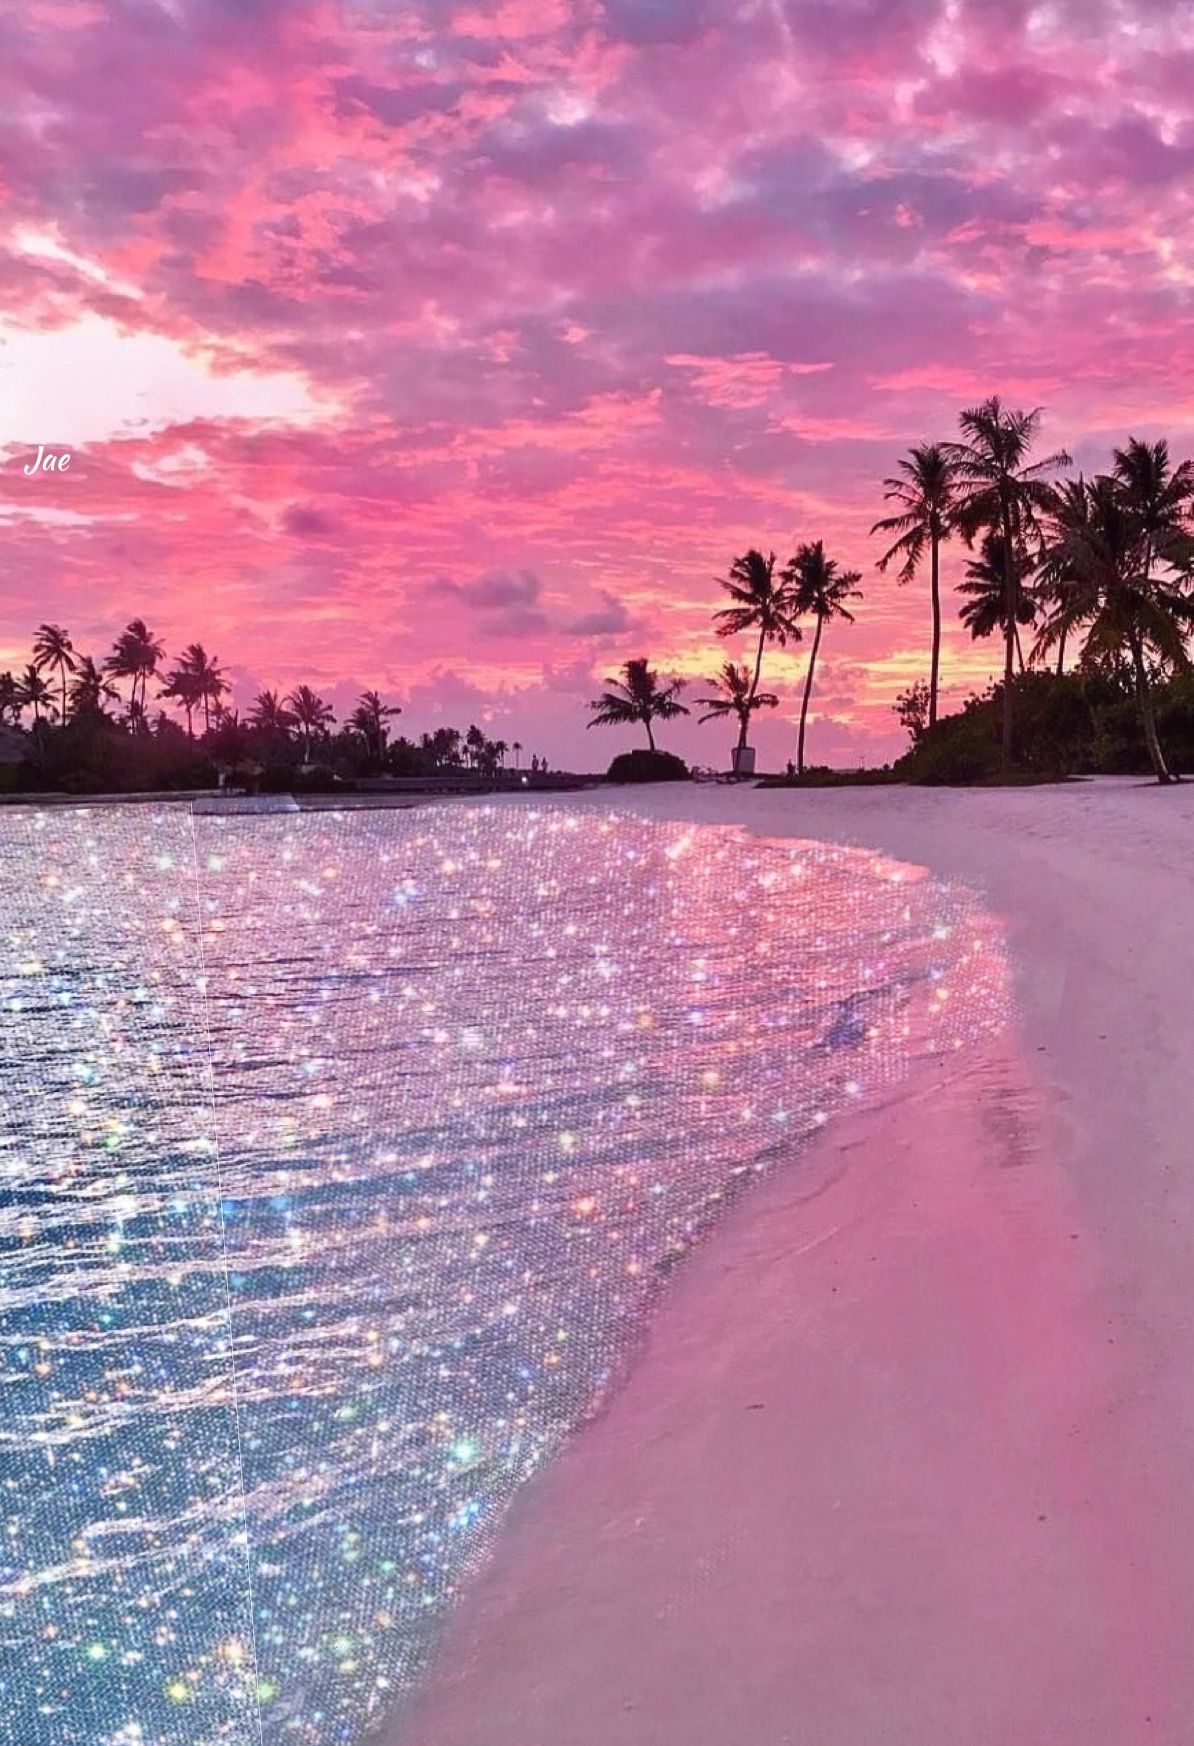 A beach with palm trees and a pink sky - Florida